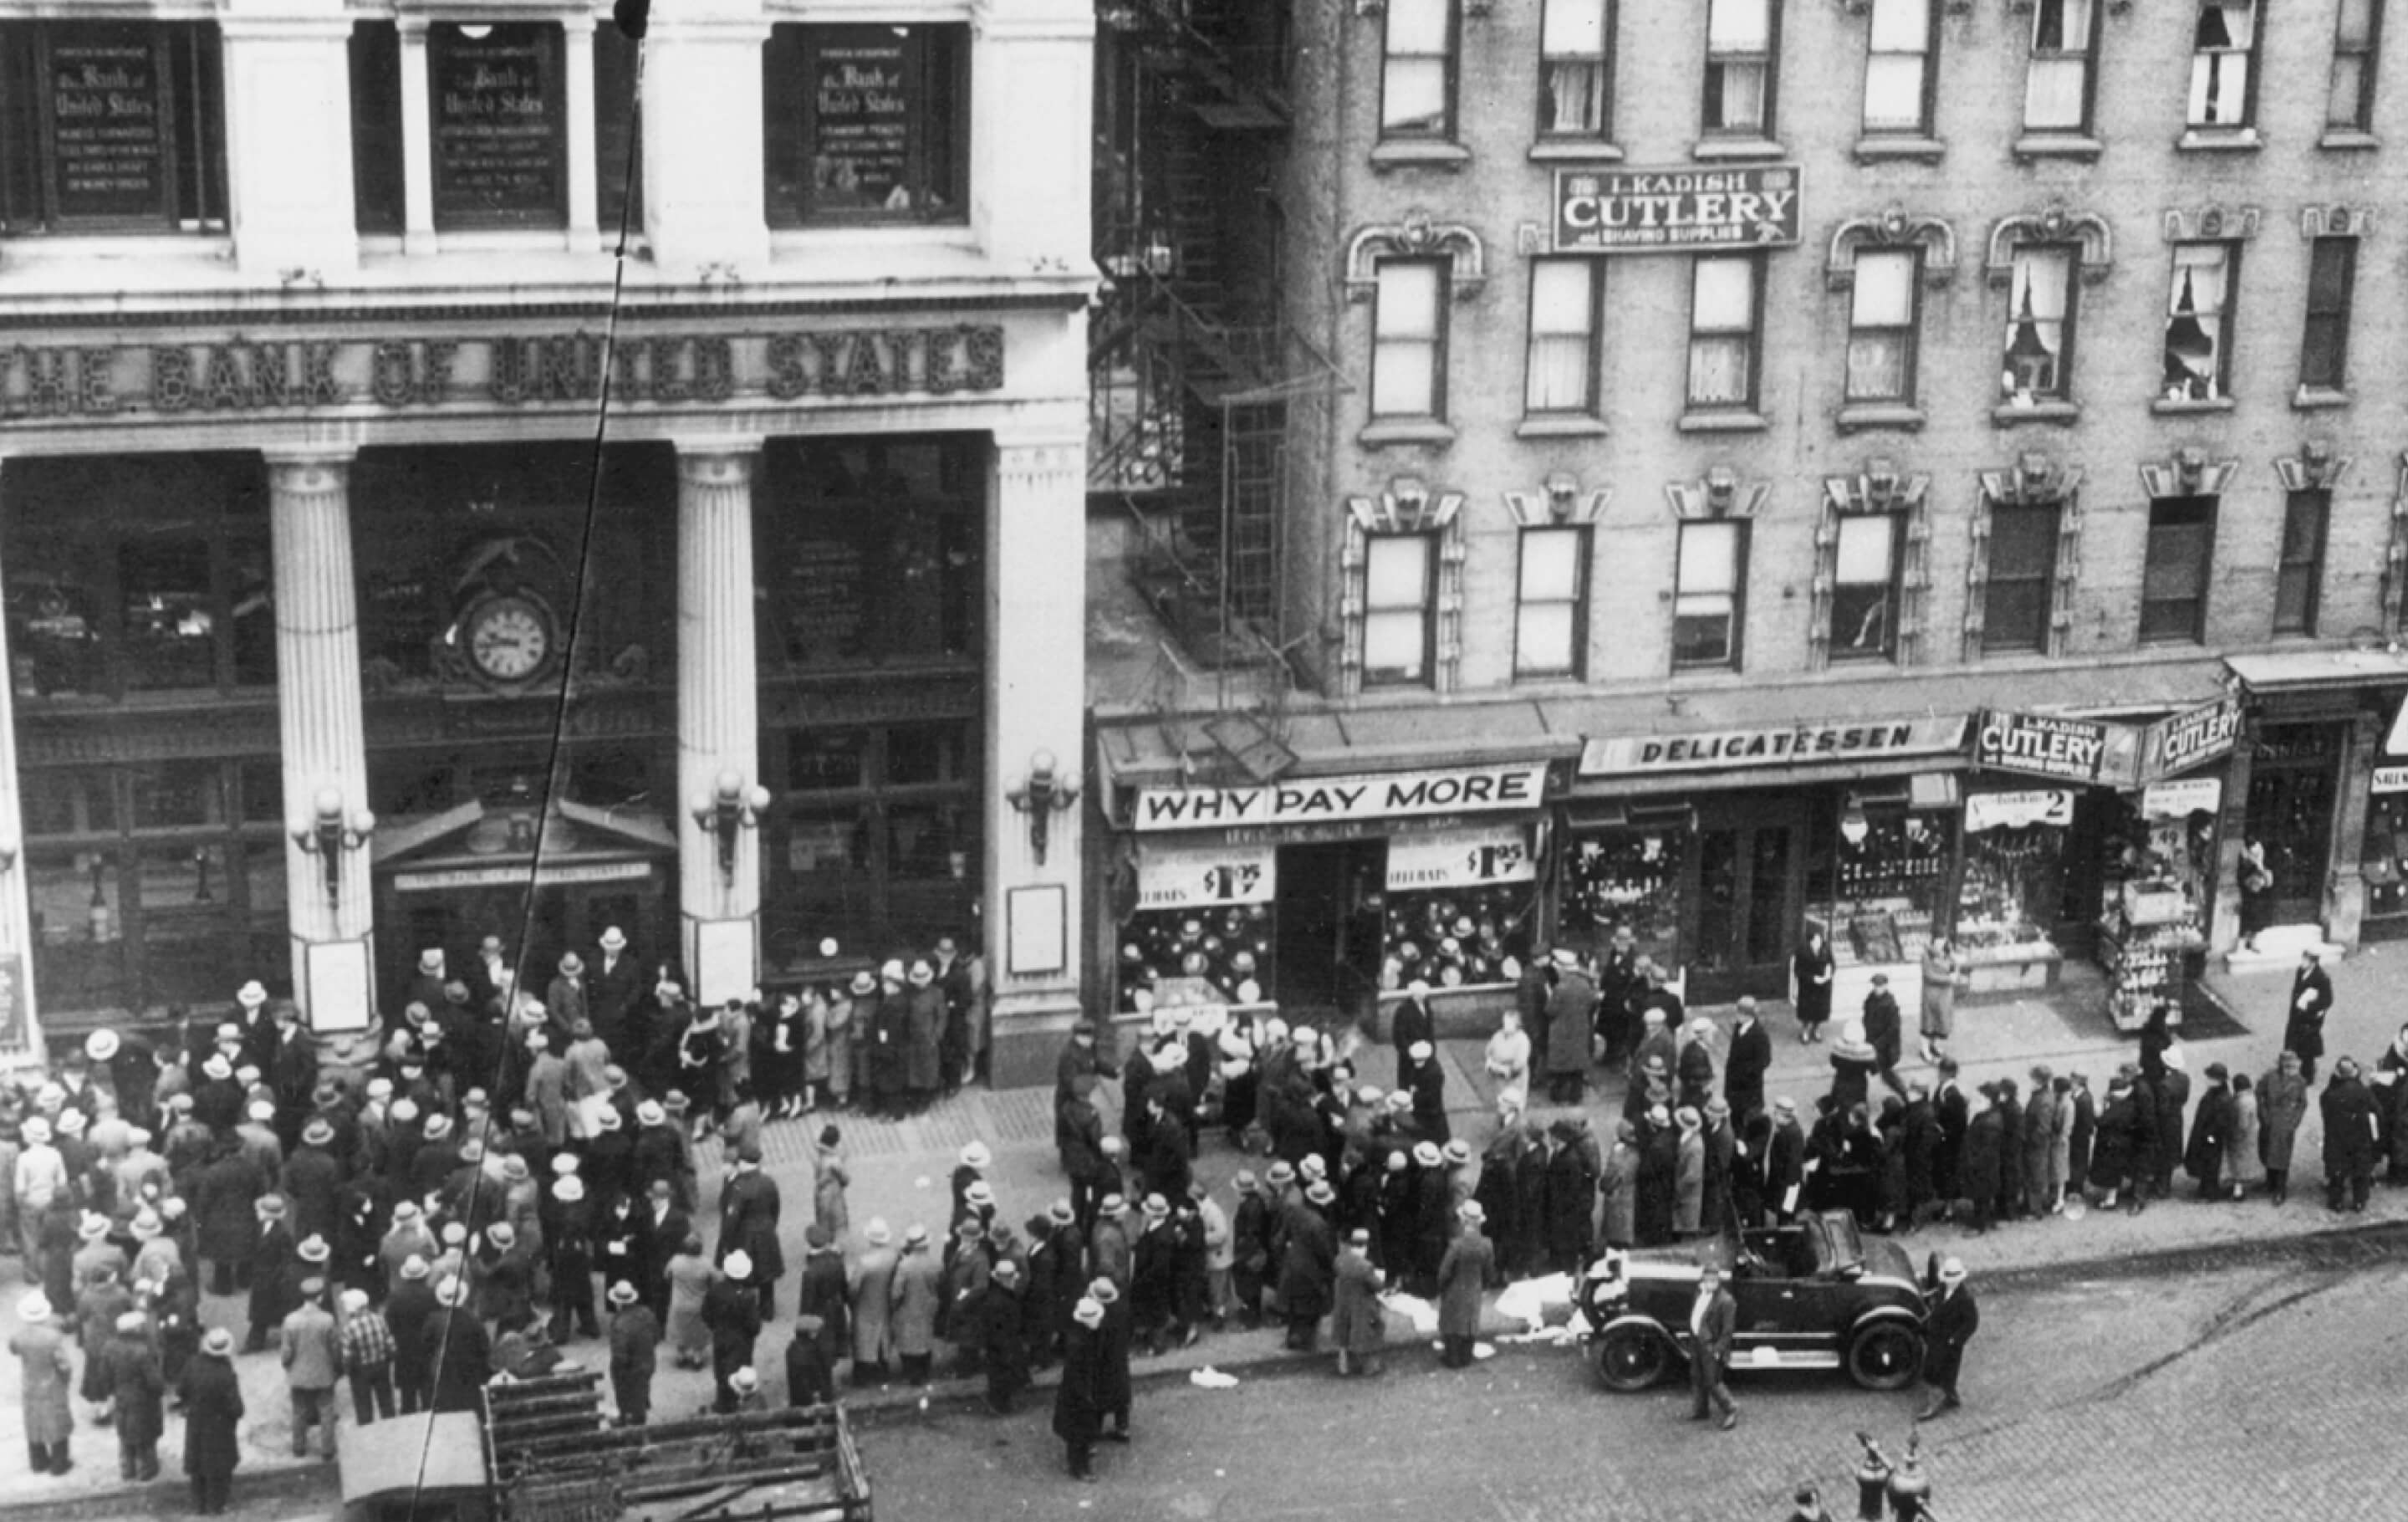 Image of people in front of bank